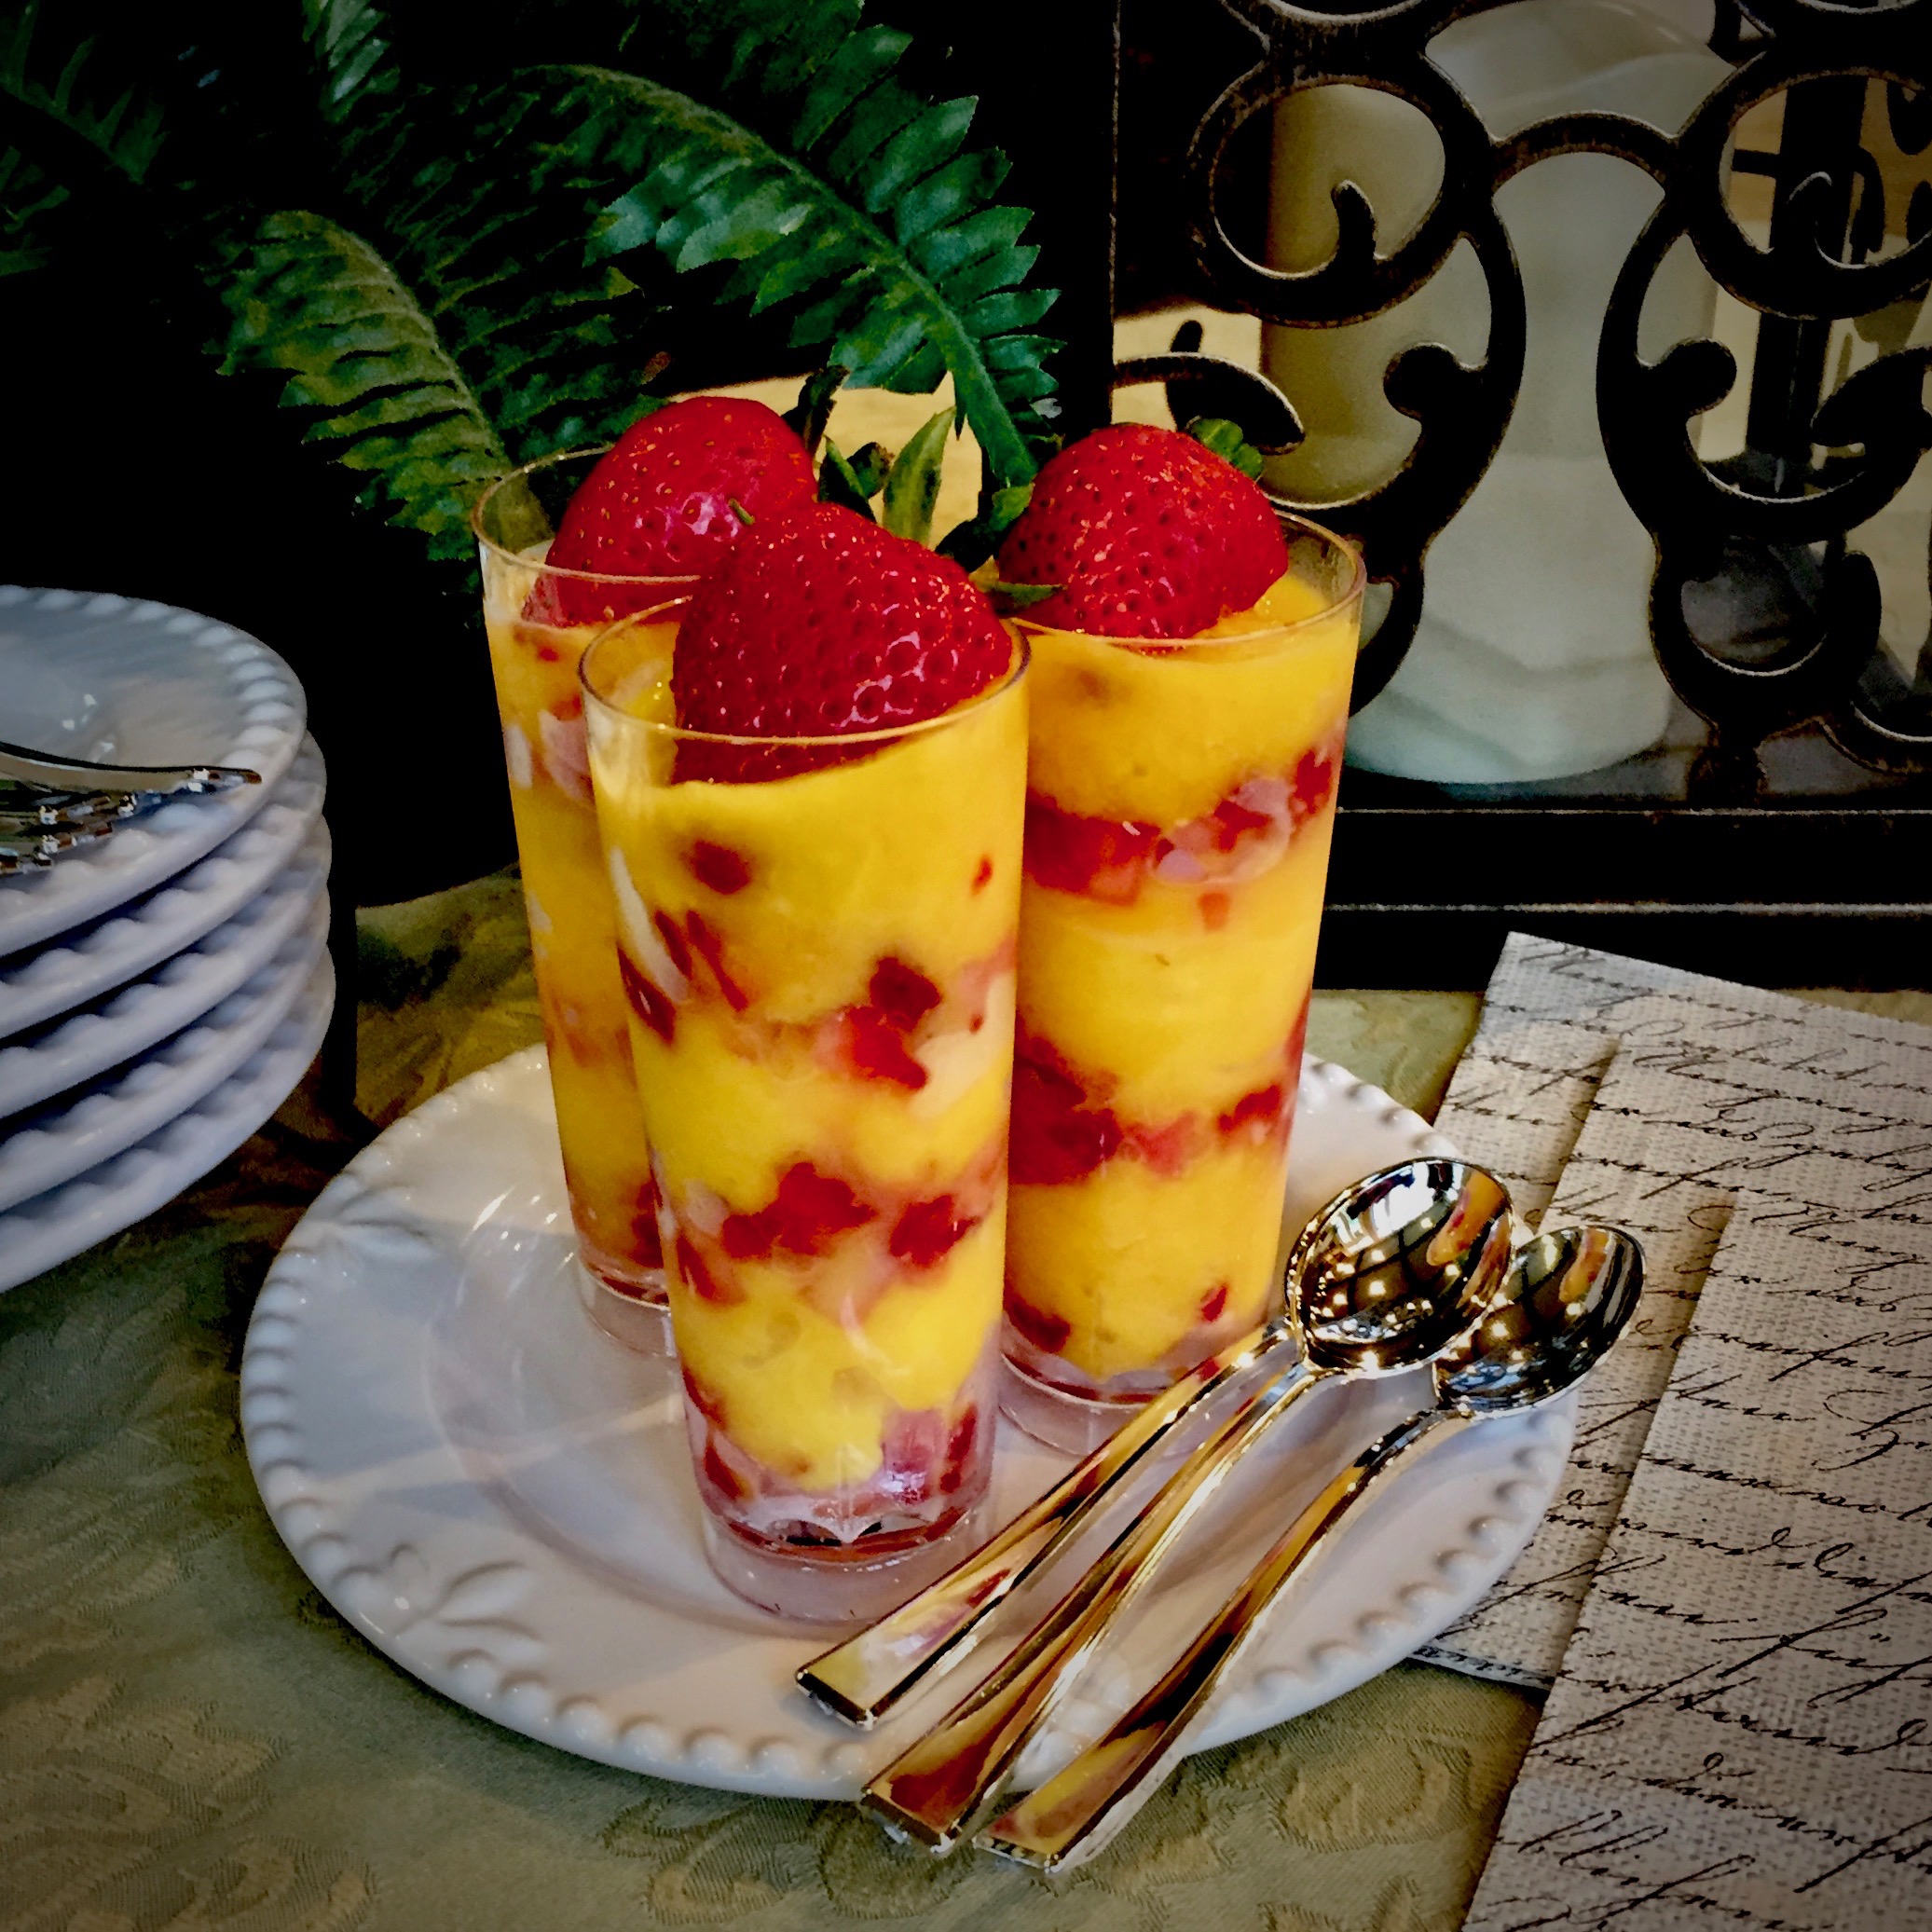 One Ingredient Mango Sorbet Layered with Diced Strawberries.